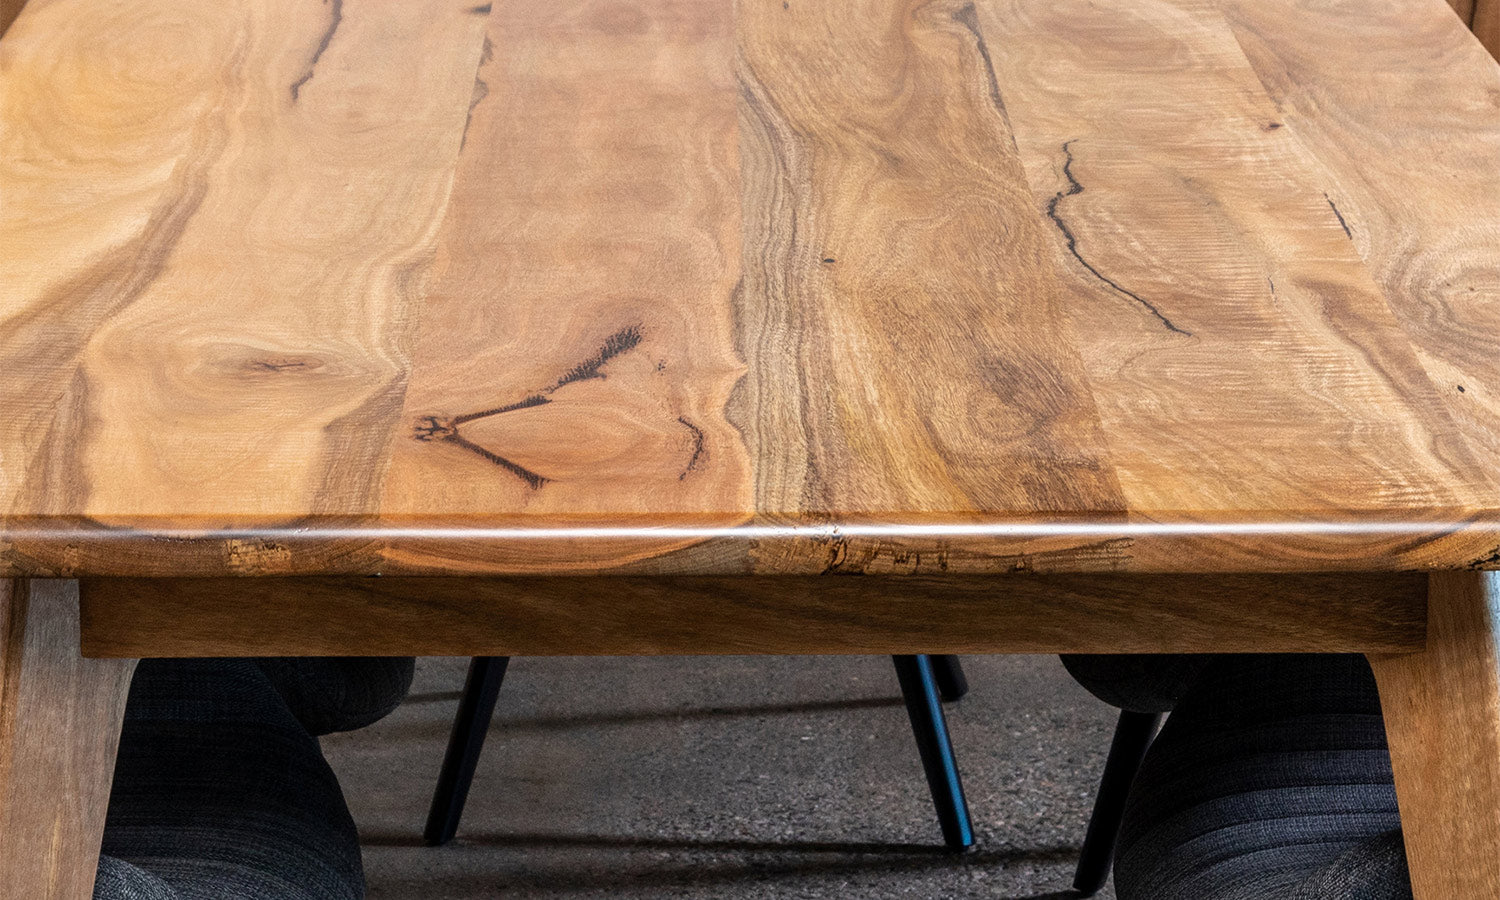 Sienna Marri Timber Solid Wood Dining Table Perth WA Tabletop Closeup